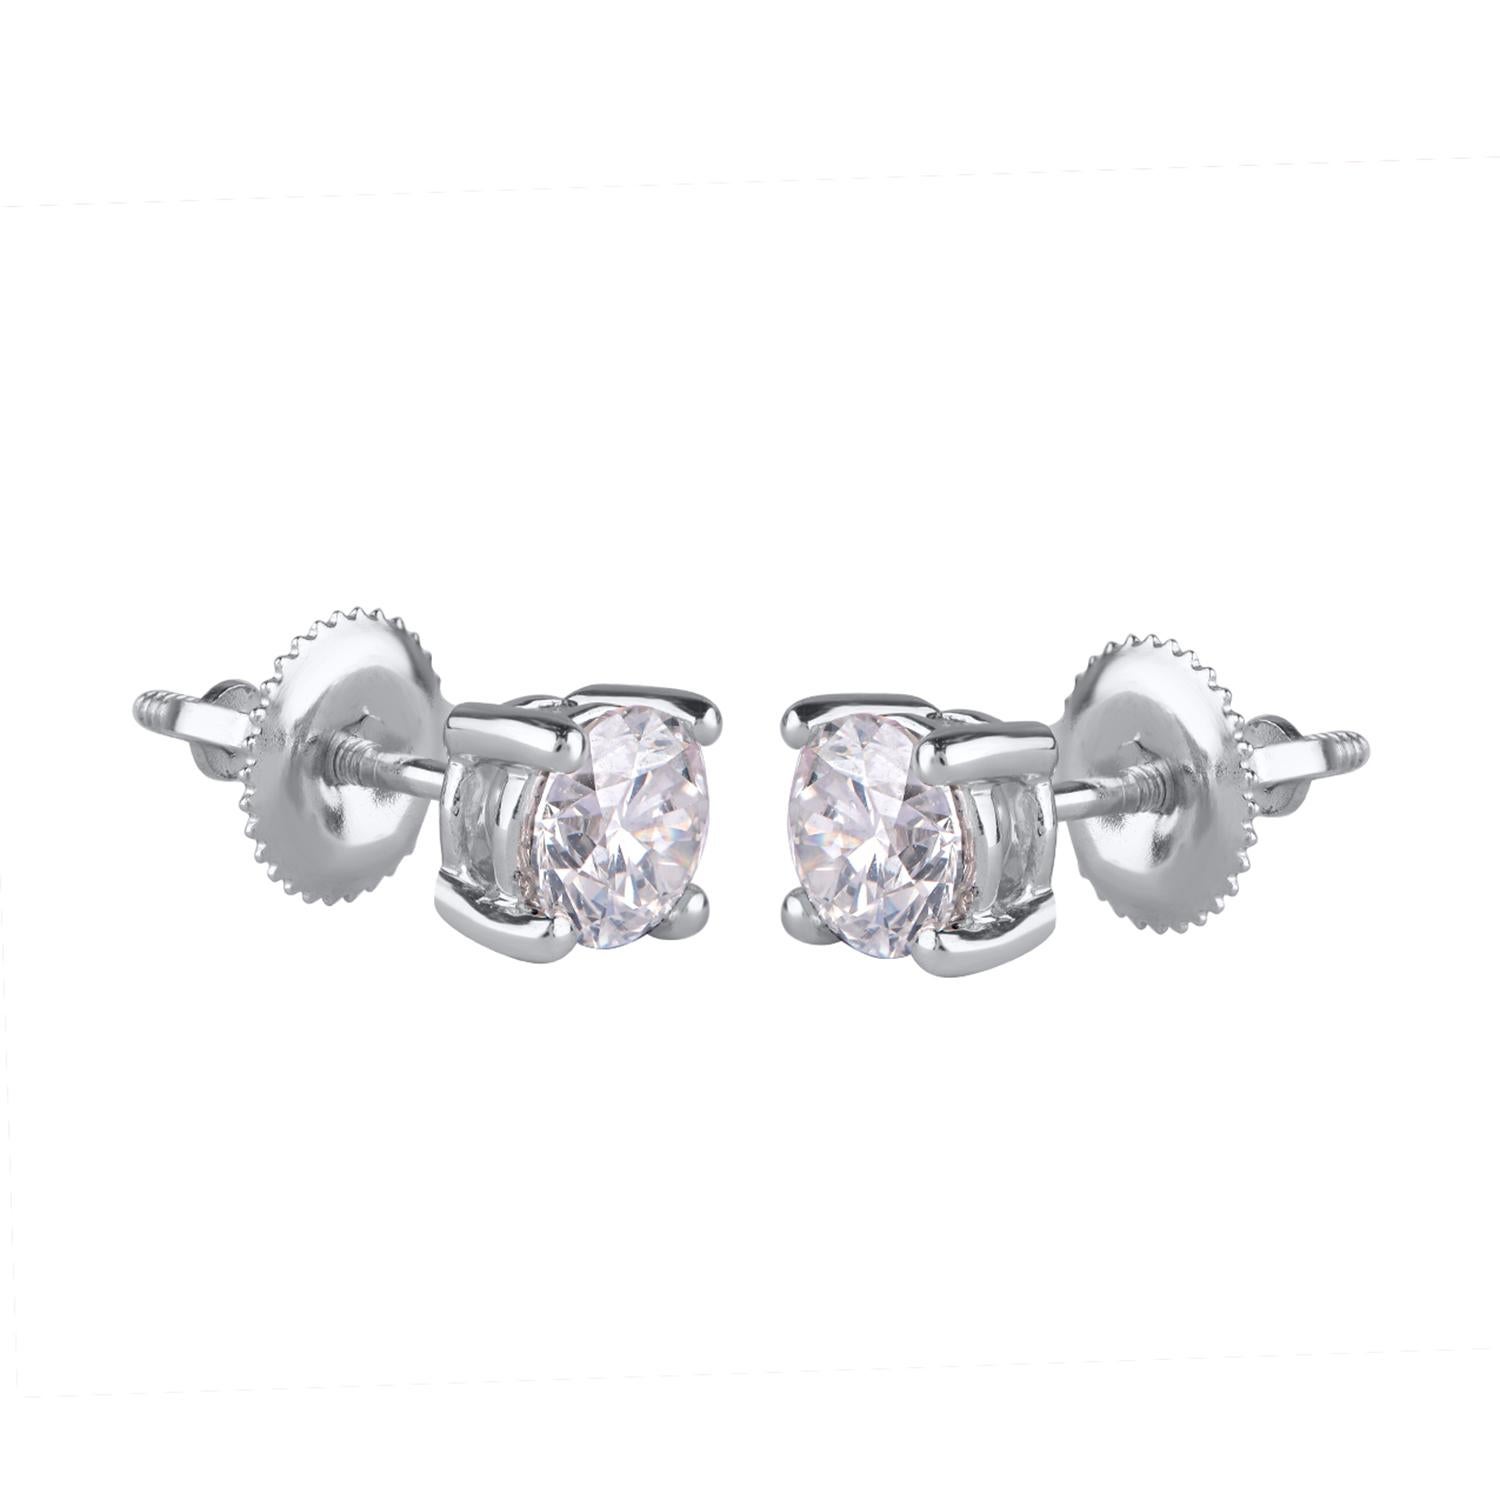 Create an impressive look with these dazzling diamond stud earrings. Handcrafted in 18K white gold, buffed to a brilliant luster, these stud earrings secure comfortably with screw back.